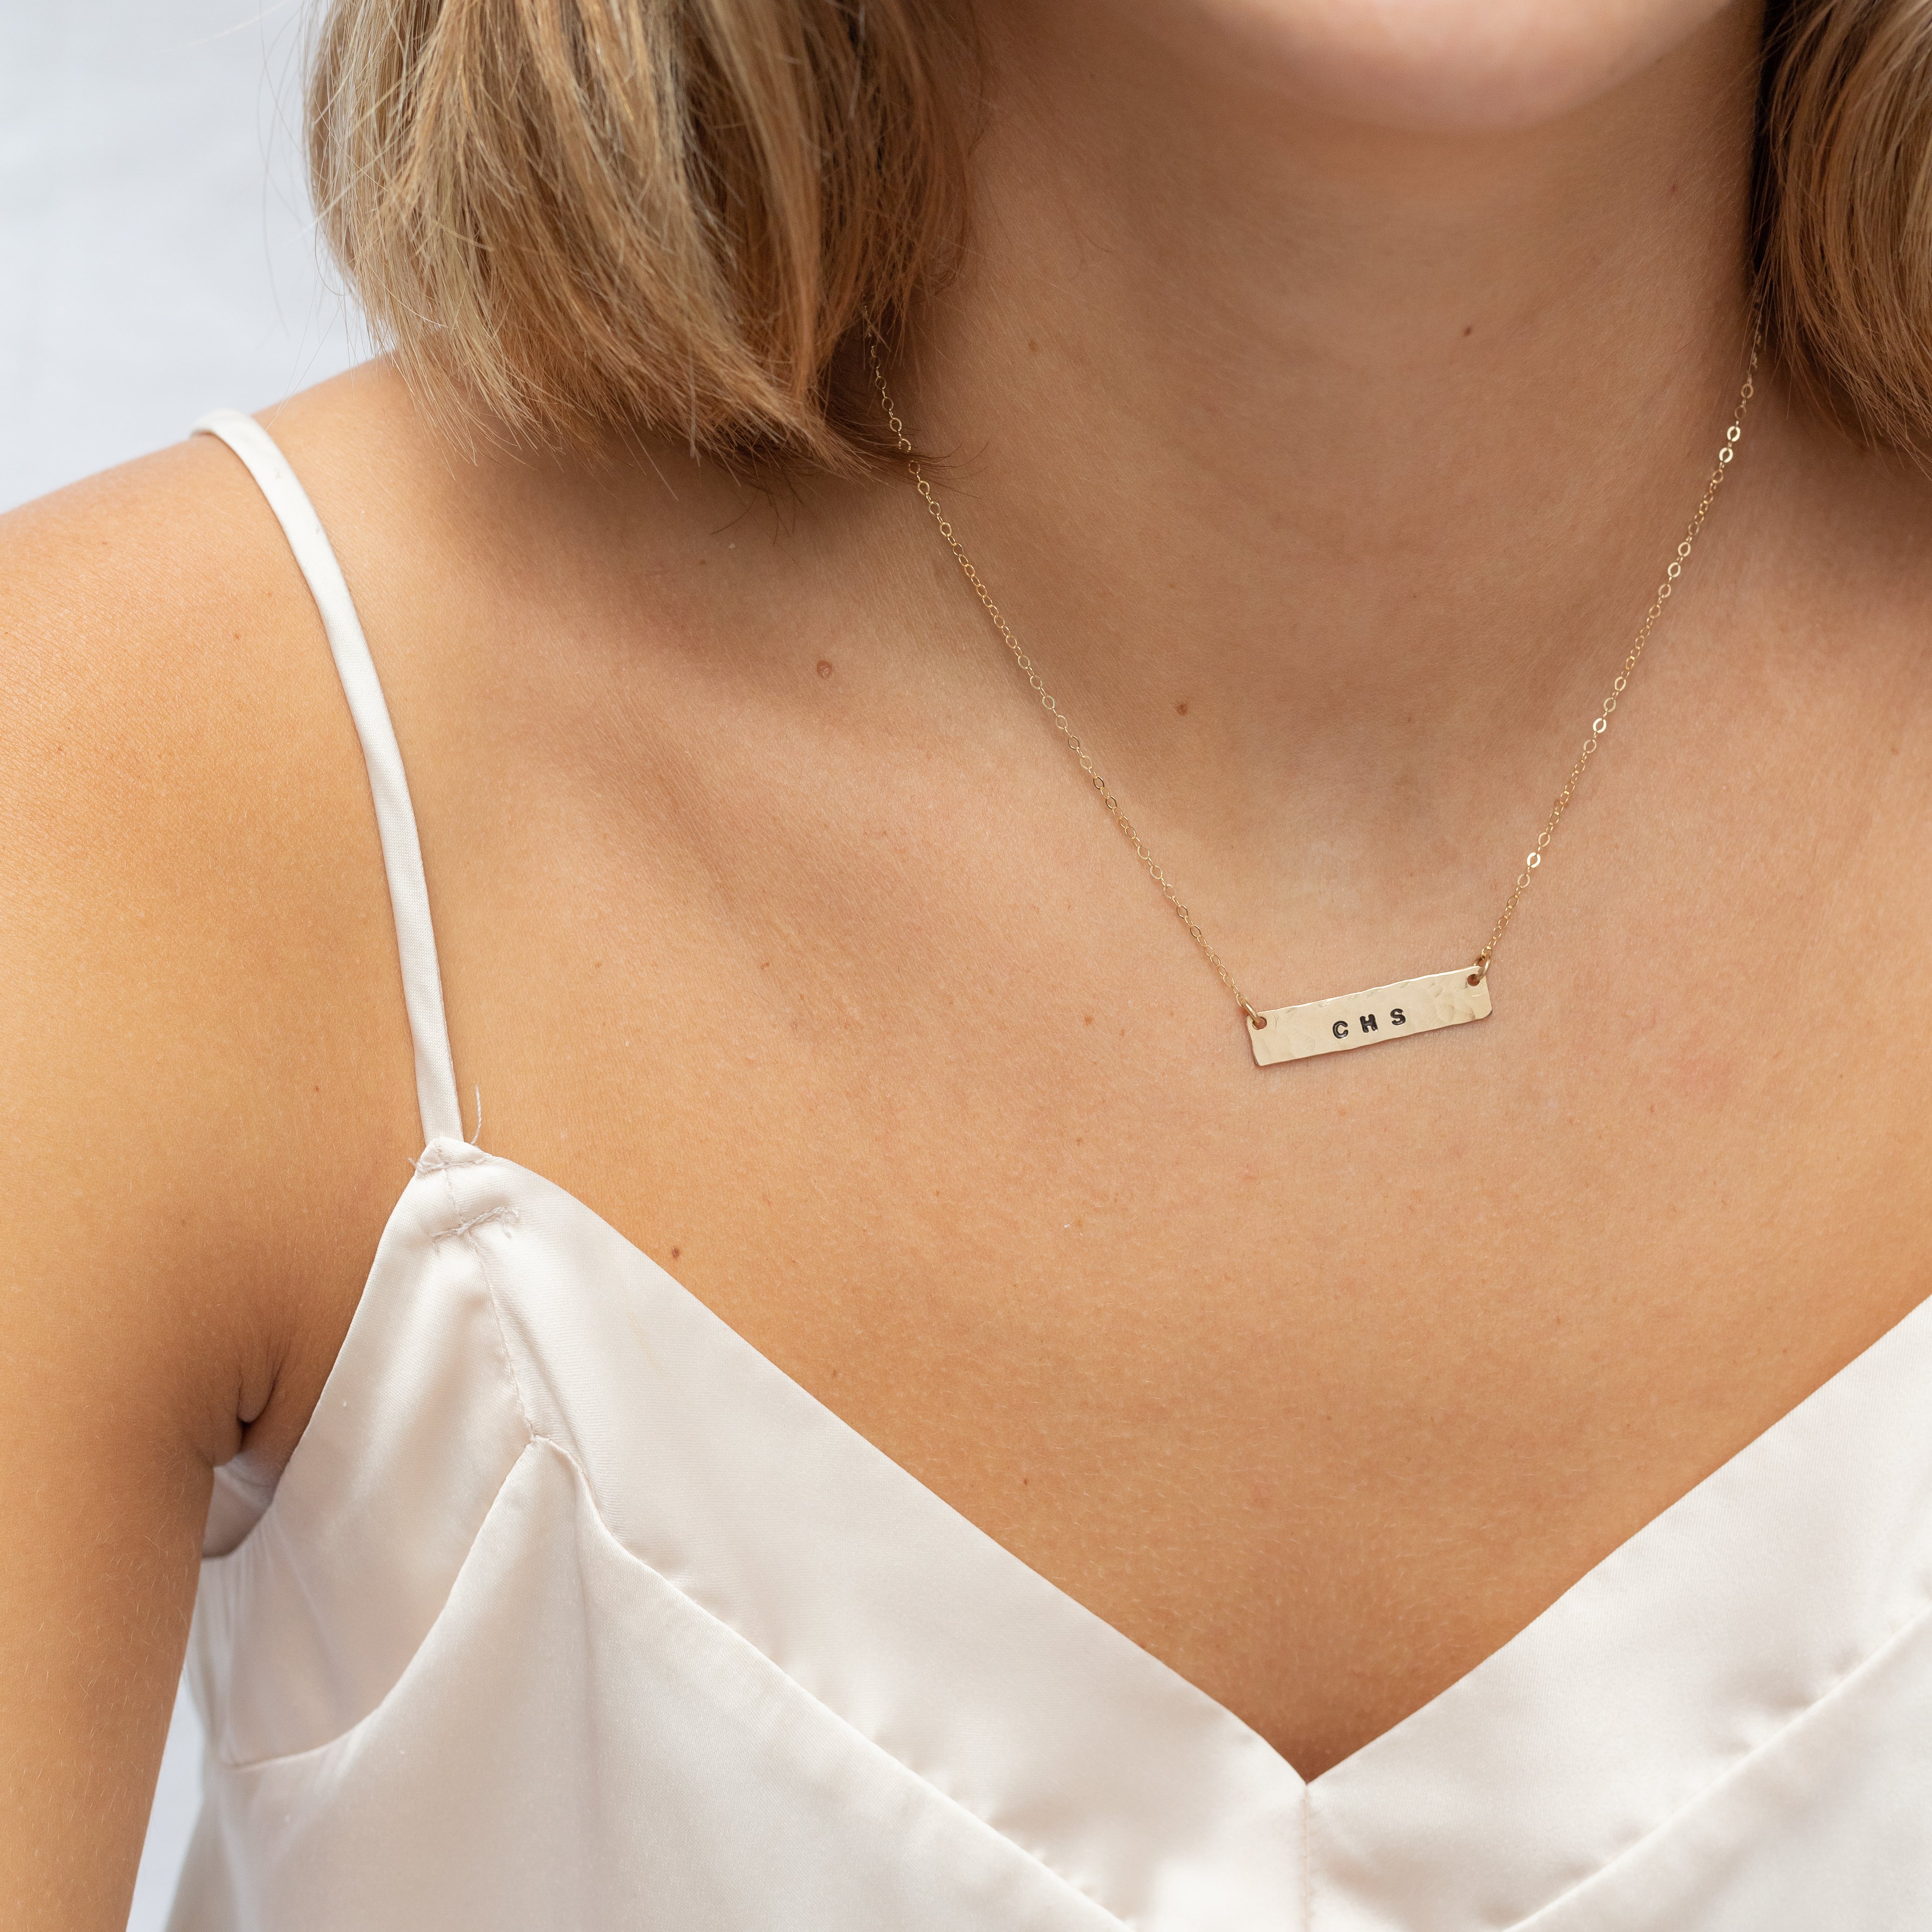 Hand stamped horizontal gold filled bar with phrases on it. Attached to a gold chain. Shown on a woman's neck